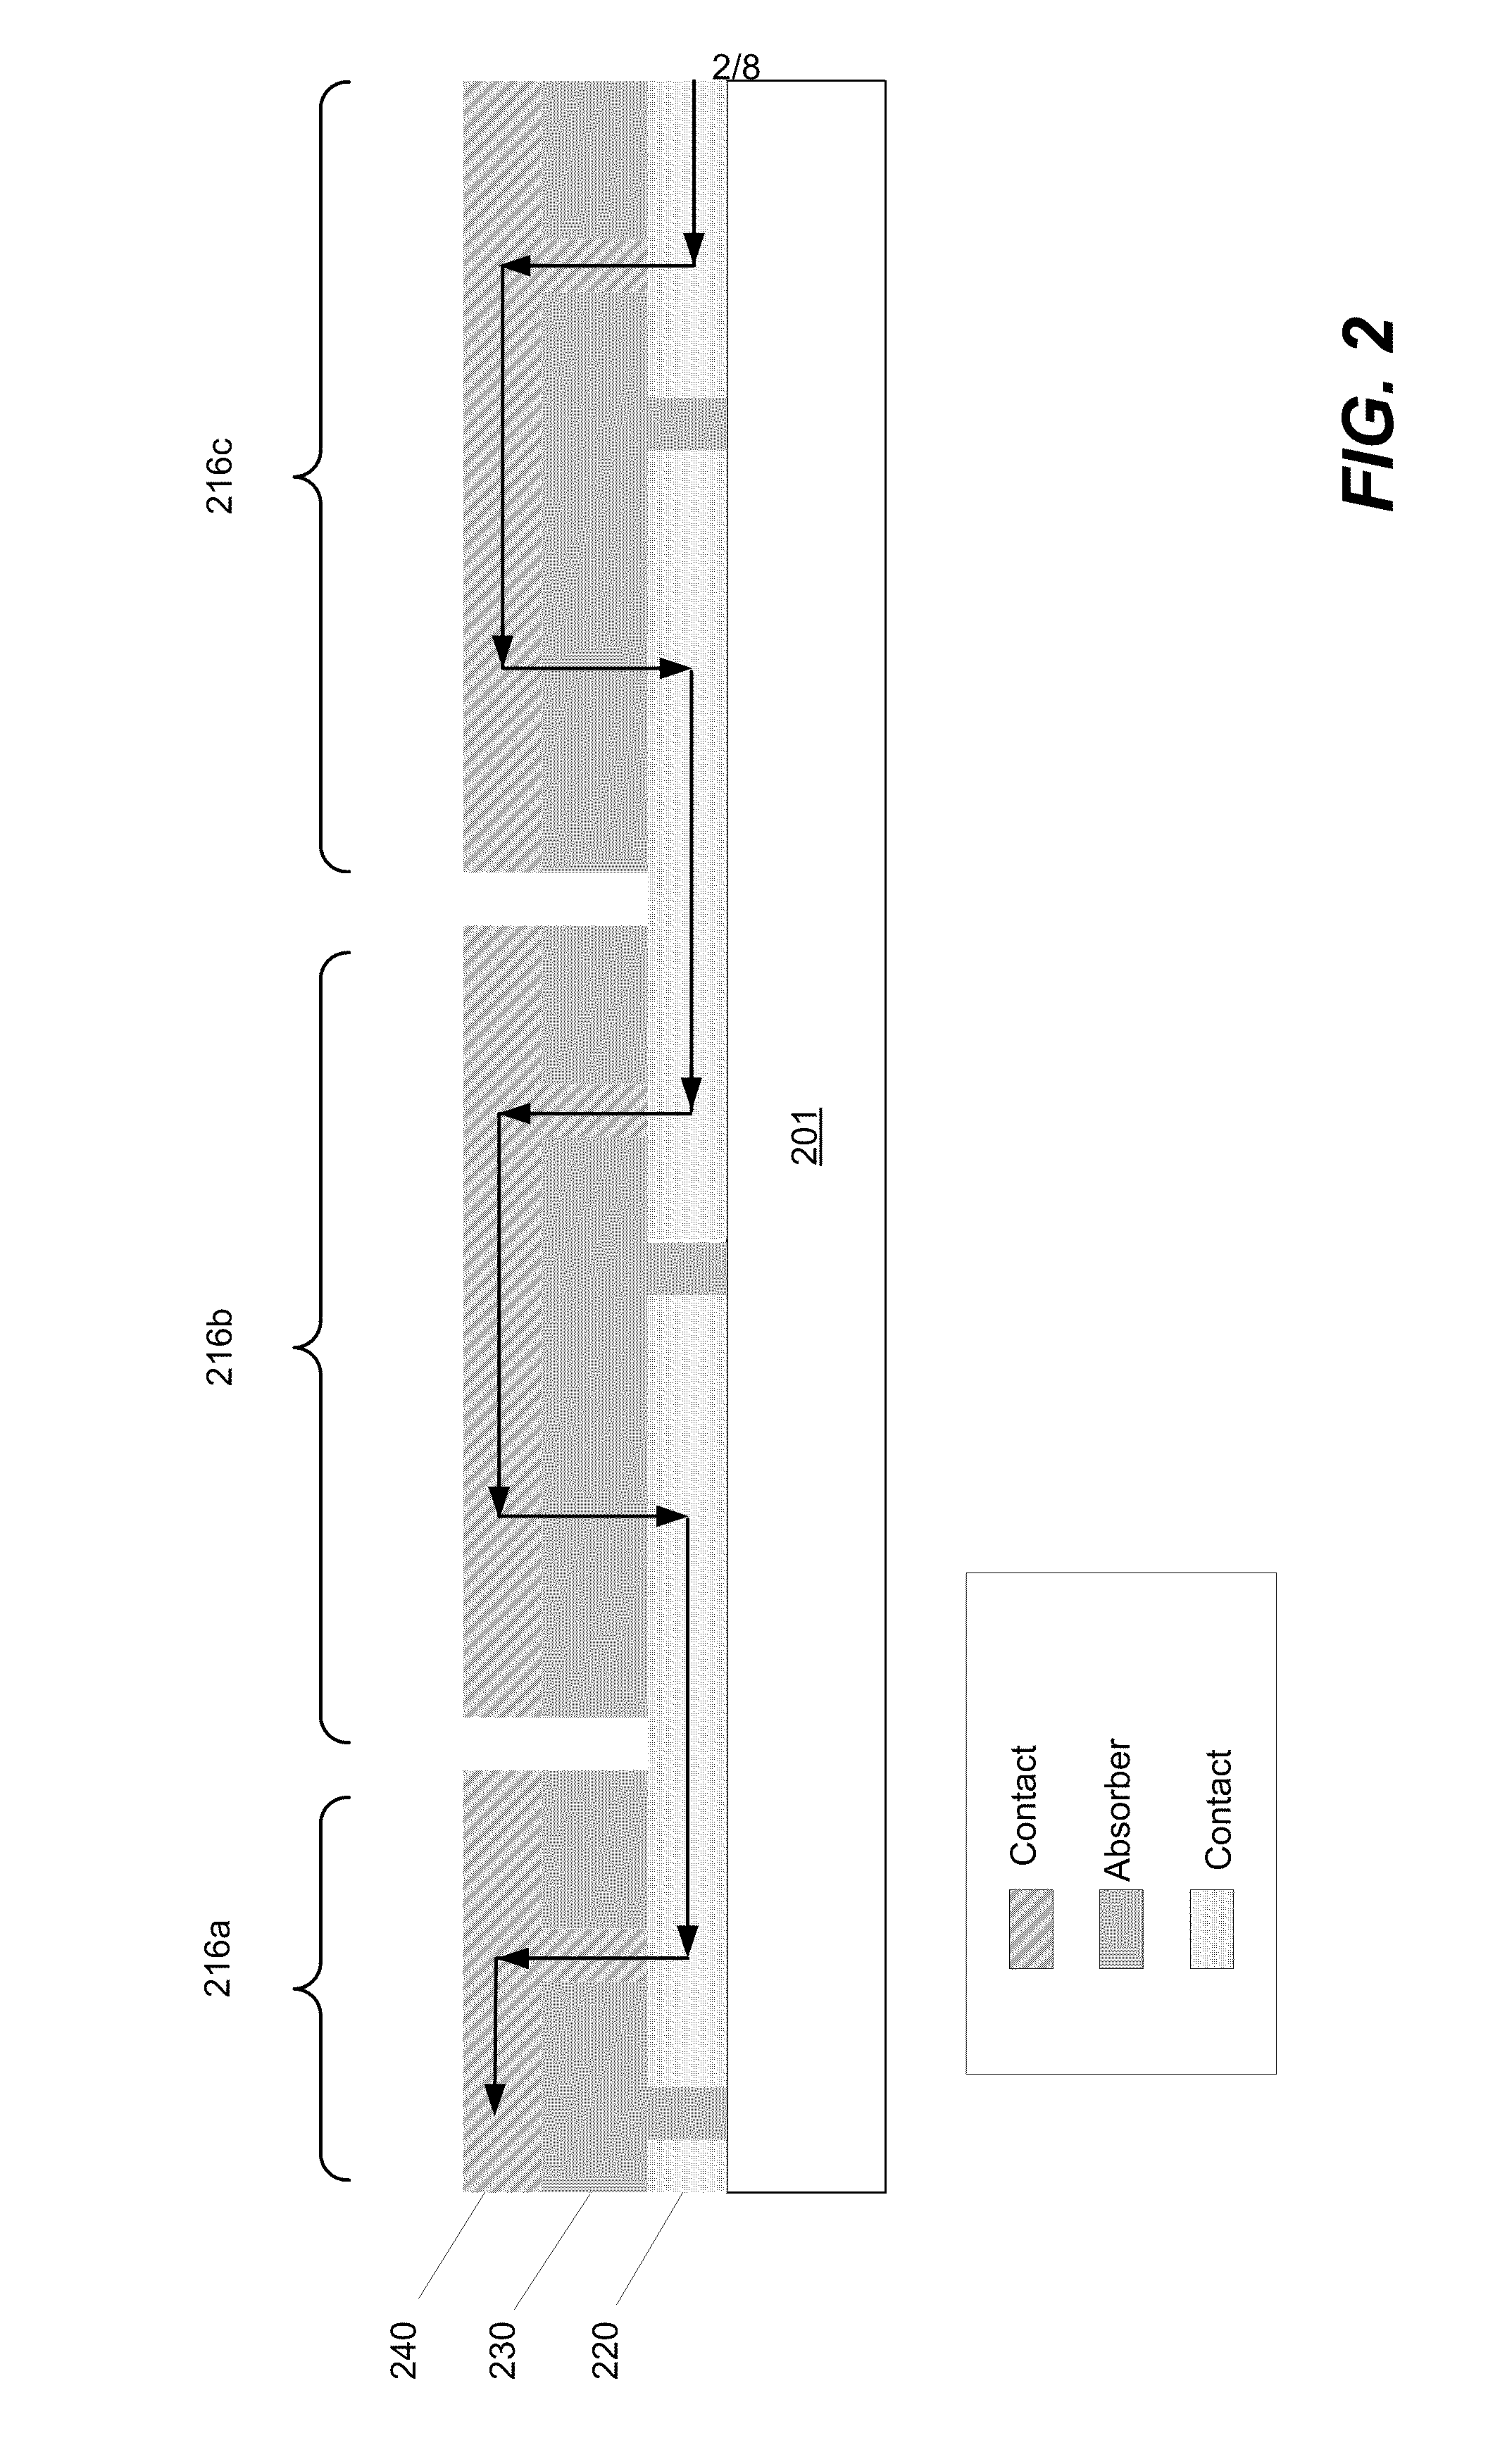 Ablative scribing of solar cell structures